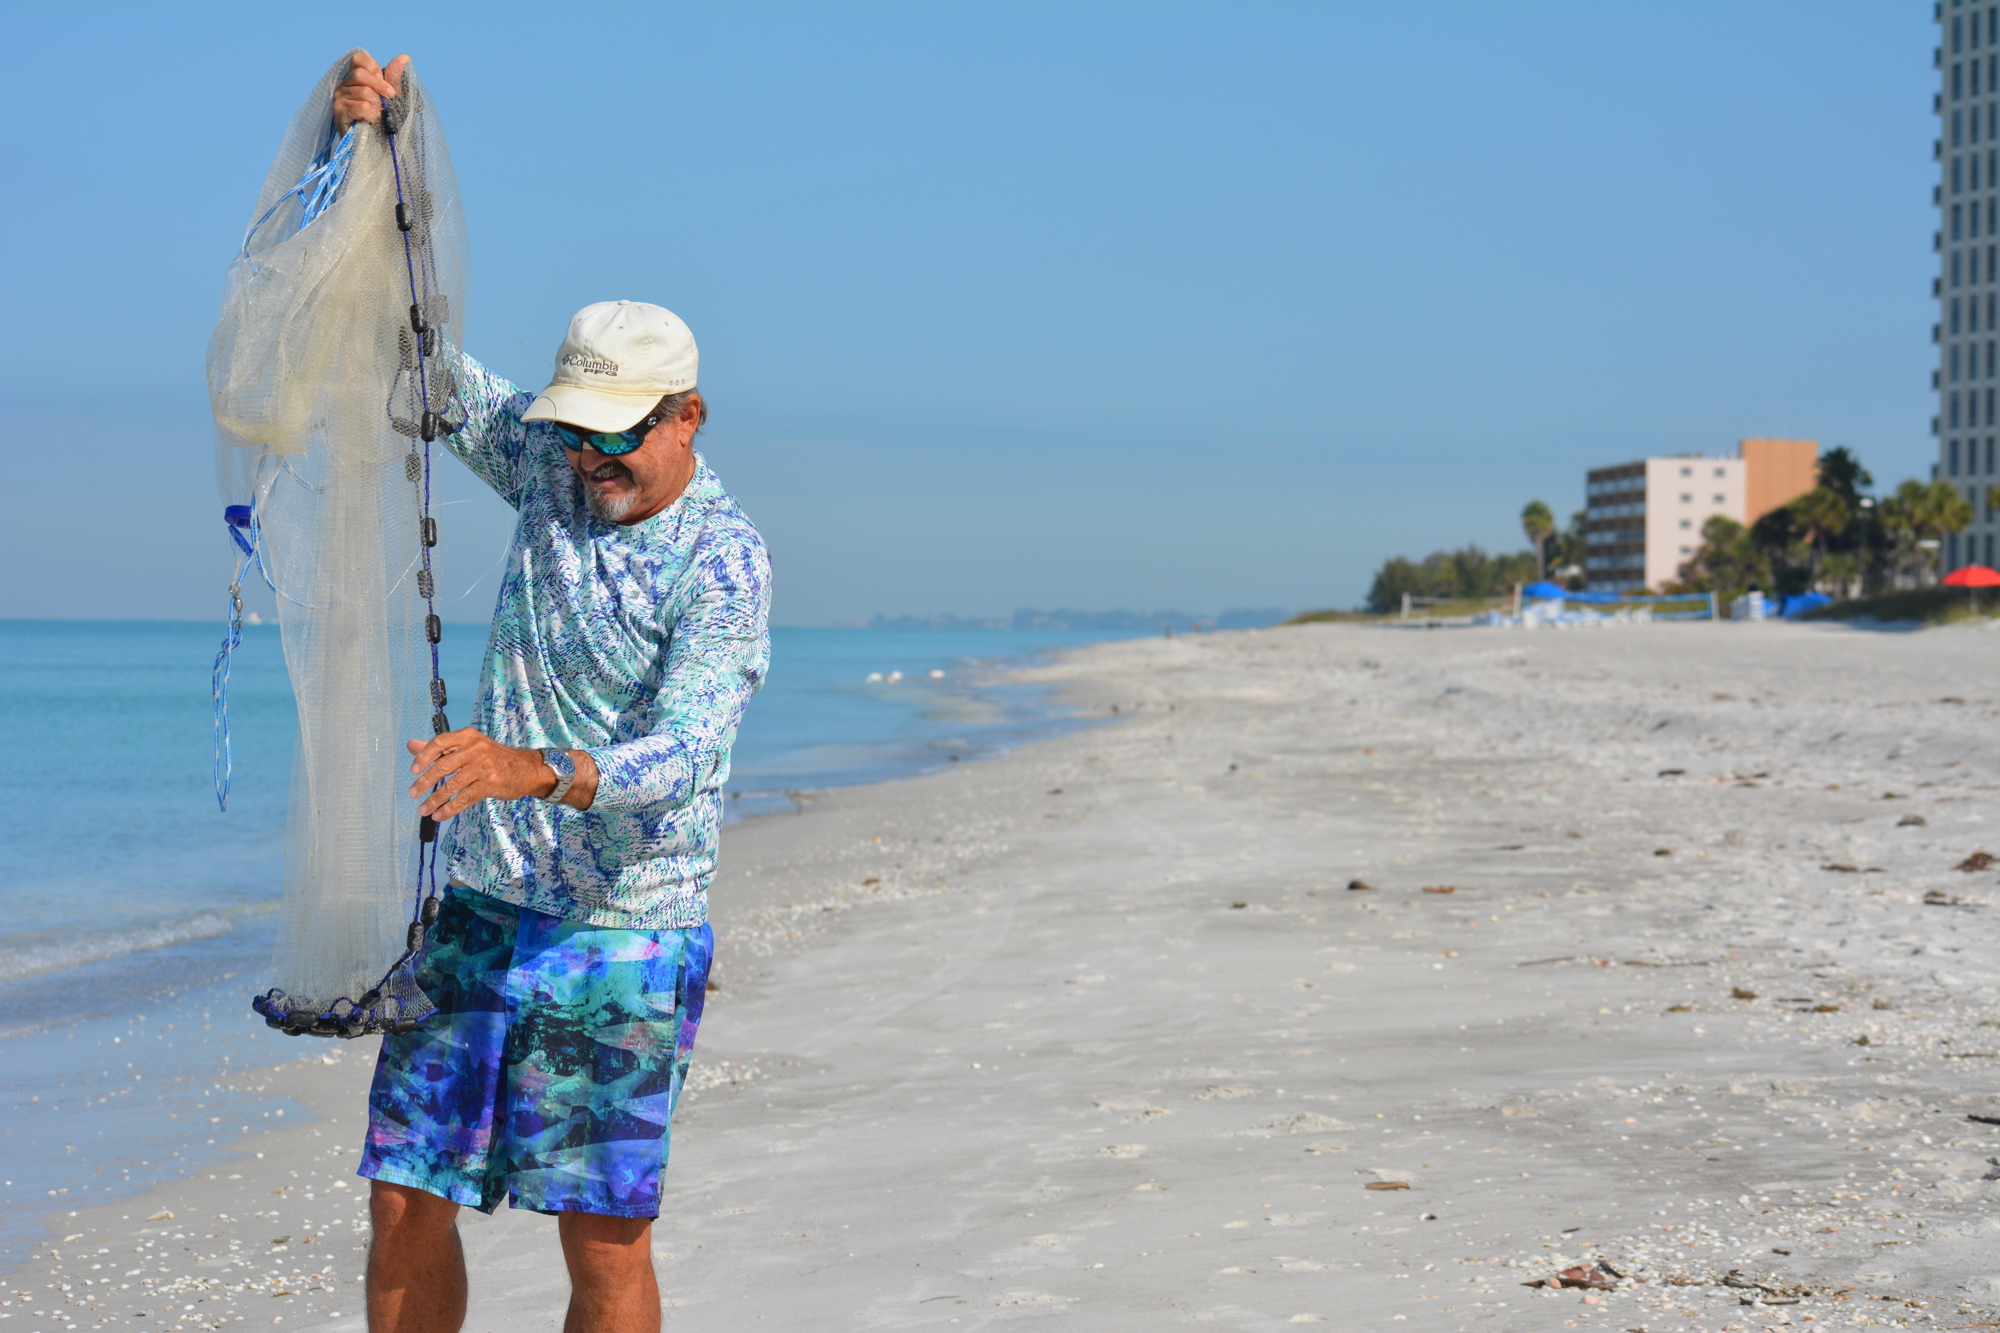 Beach Fishing Adventures proprietor Steven Herich prepares to cast a net in an attempt to catch bait Saturday on Longboat Key.